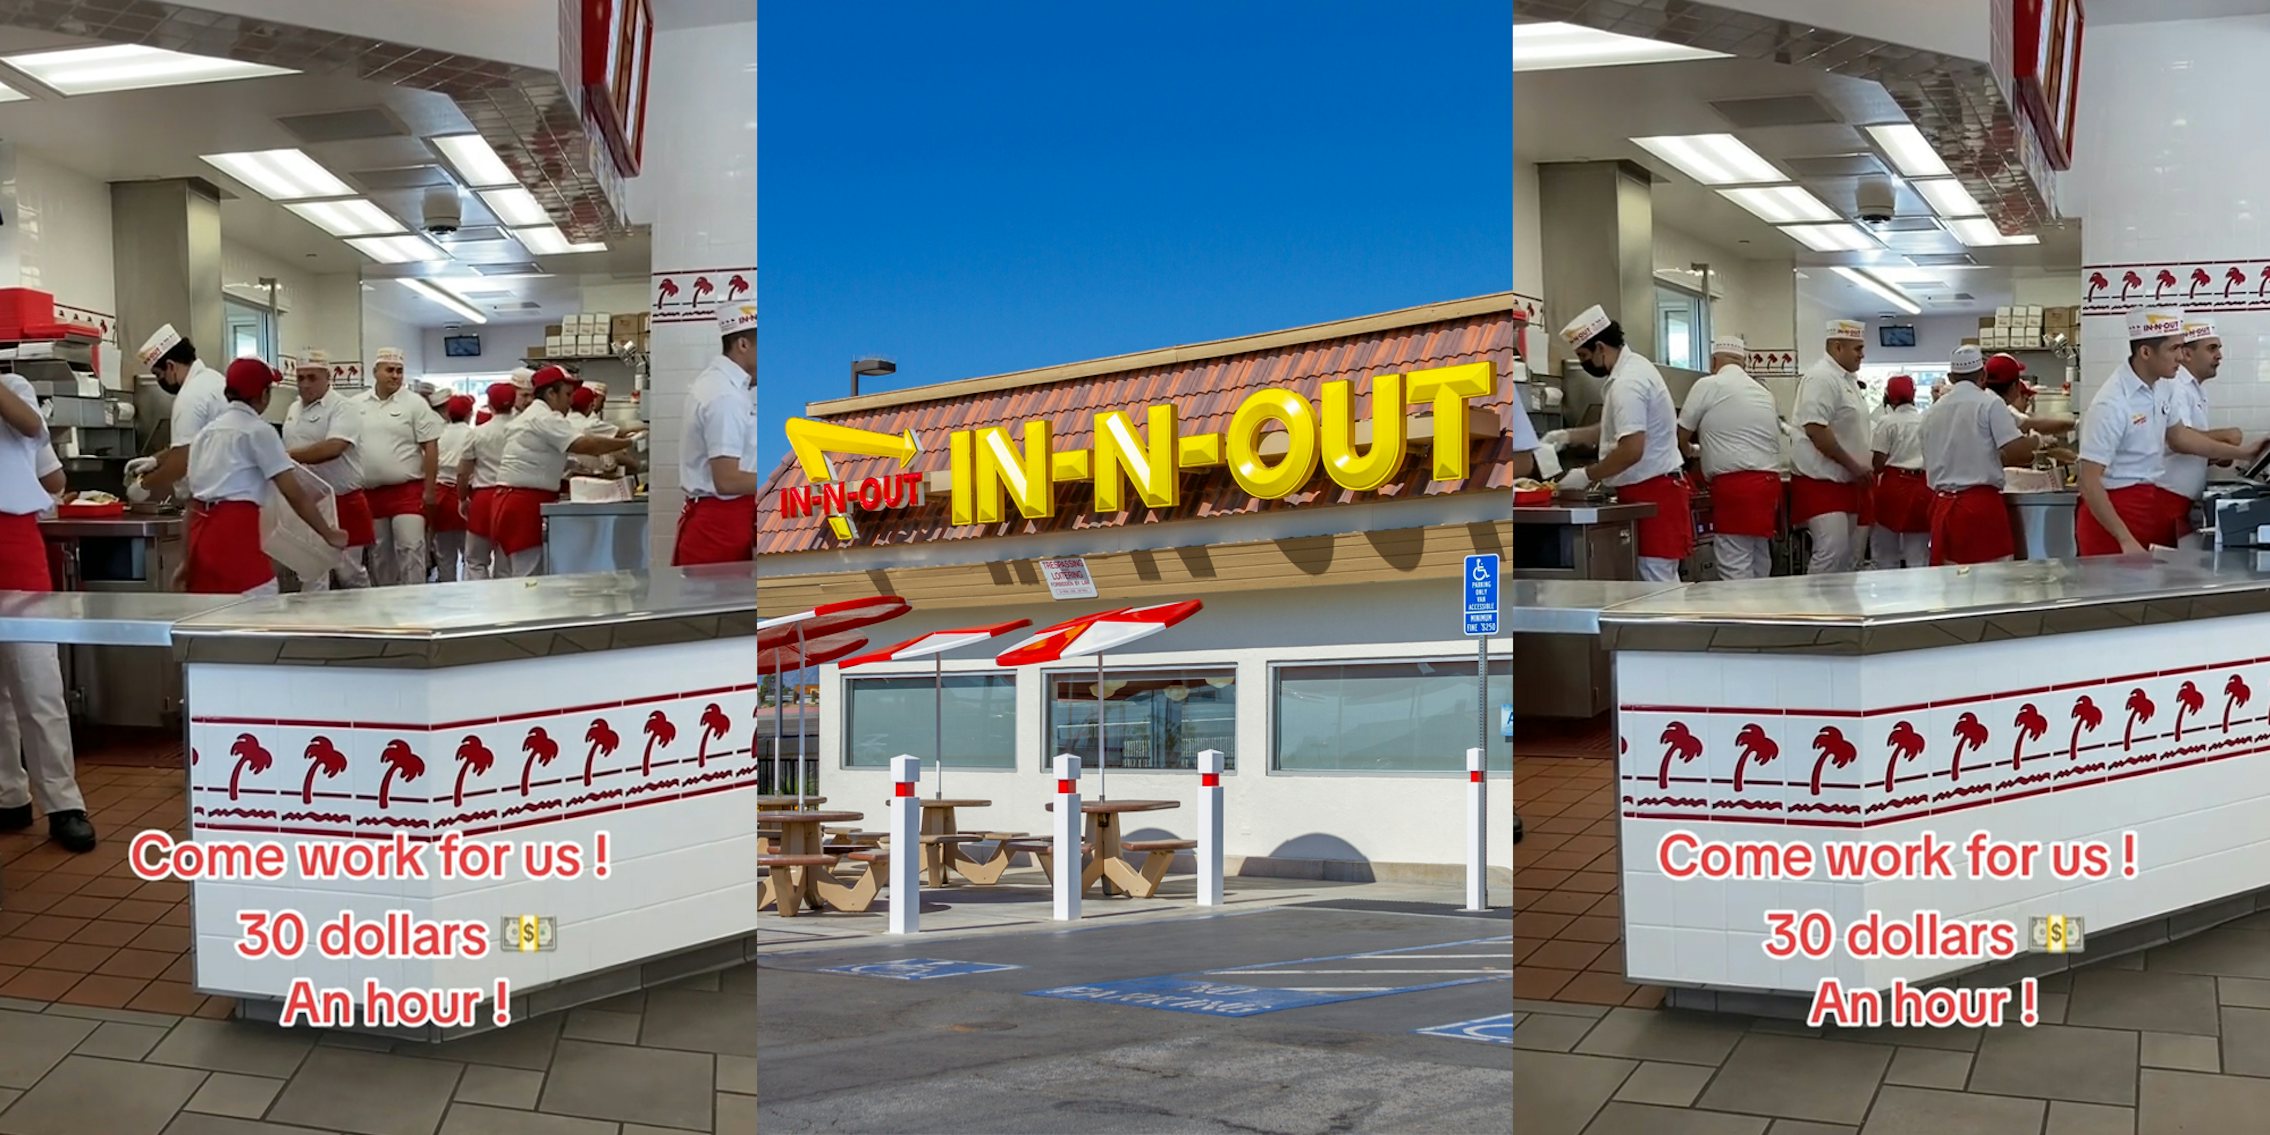 In-N-Out Burger workers with caption 'Come work for us! 30 dollars An hour!' (l) In-N-Out Burger building with signs (c) In-N-Out Burger workers with caption 'Come work for us! 30 dollars An hour!' (r)